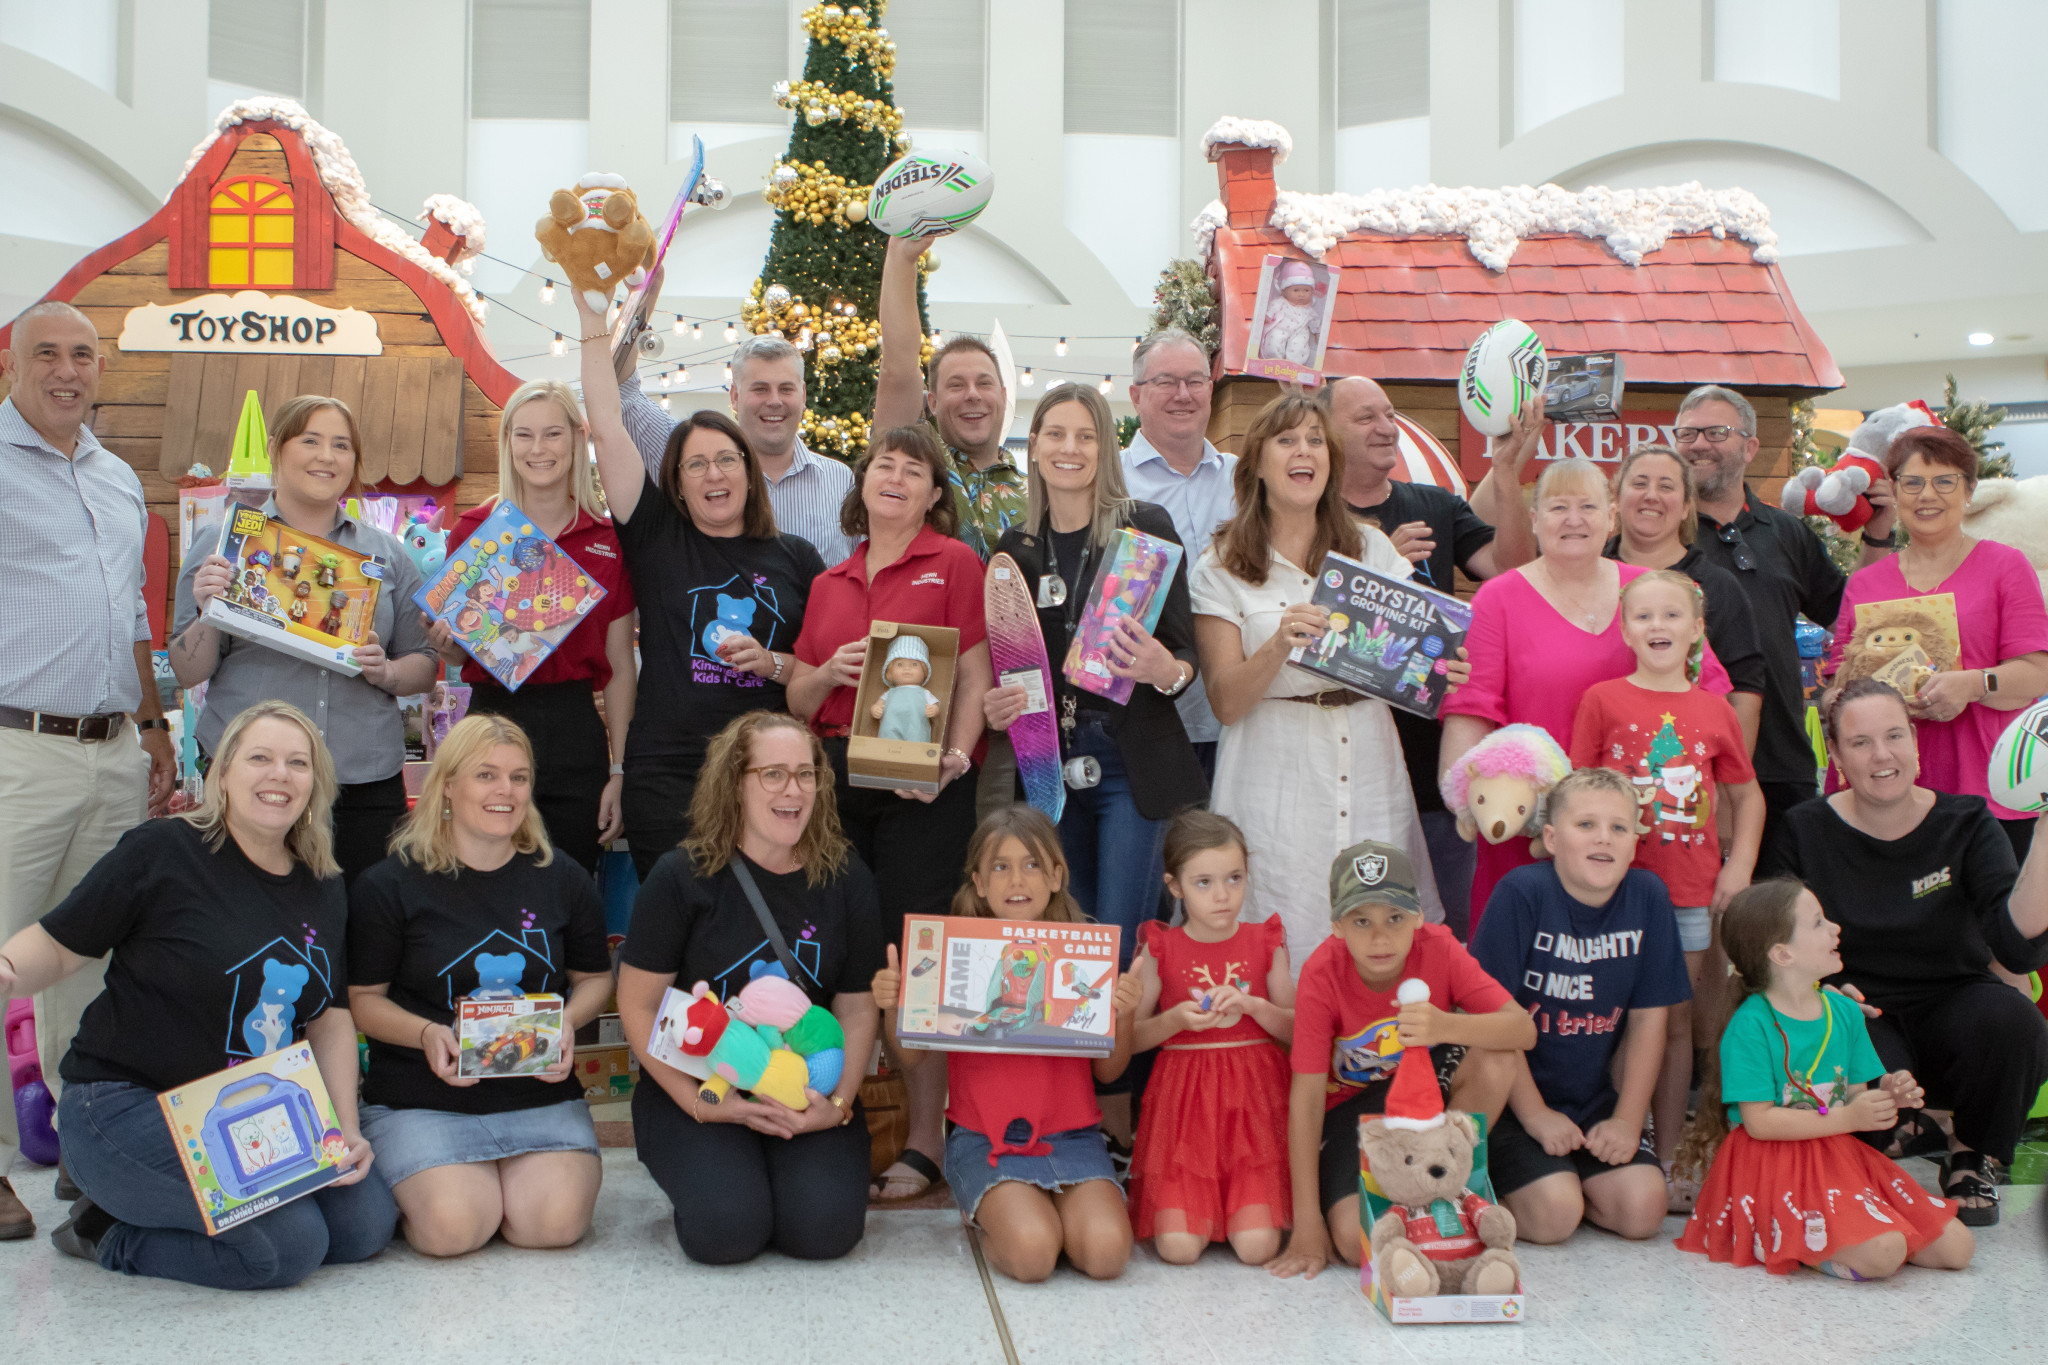 Terry Young, Mark Ryan and Peter Flannery attended the Kids in Care Christmas Toy Appeal’s handover of Christmas gifts at Morayfield Shopping Centre. Photo credit Yvonne Packbier.